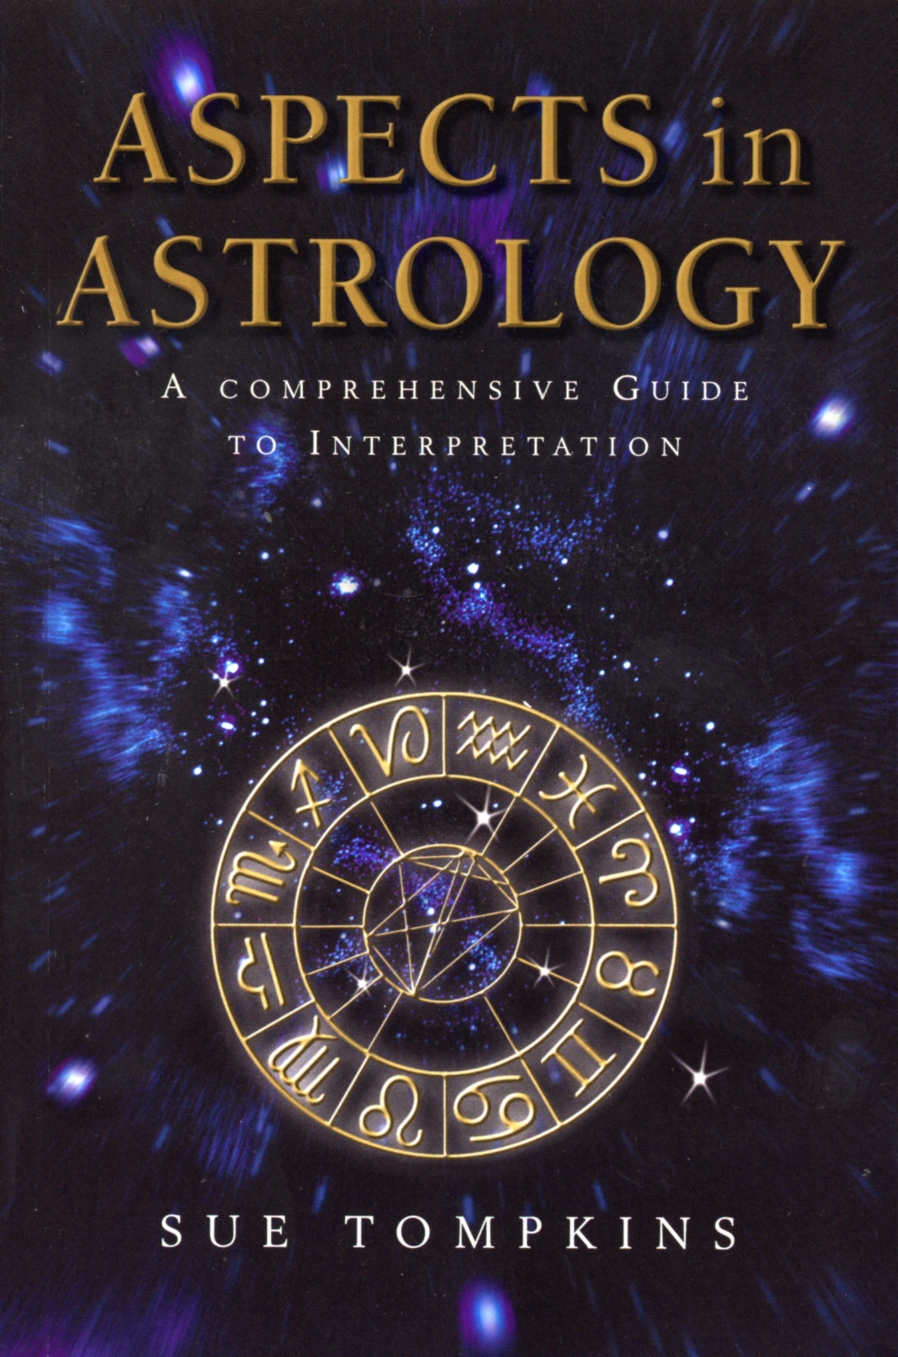 books on astrology and zodiac signs